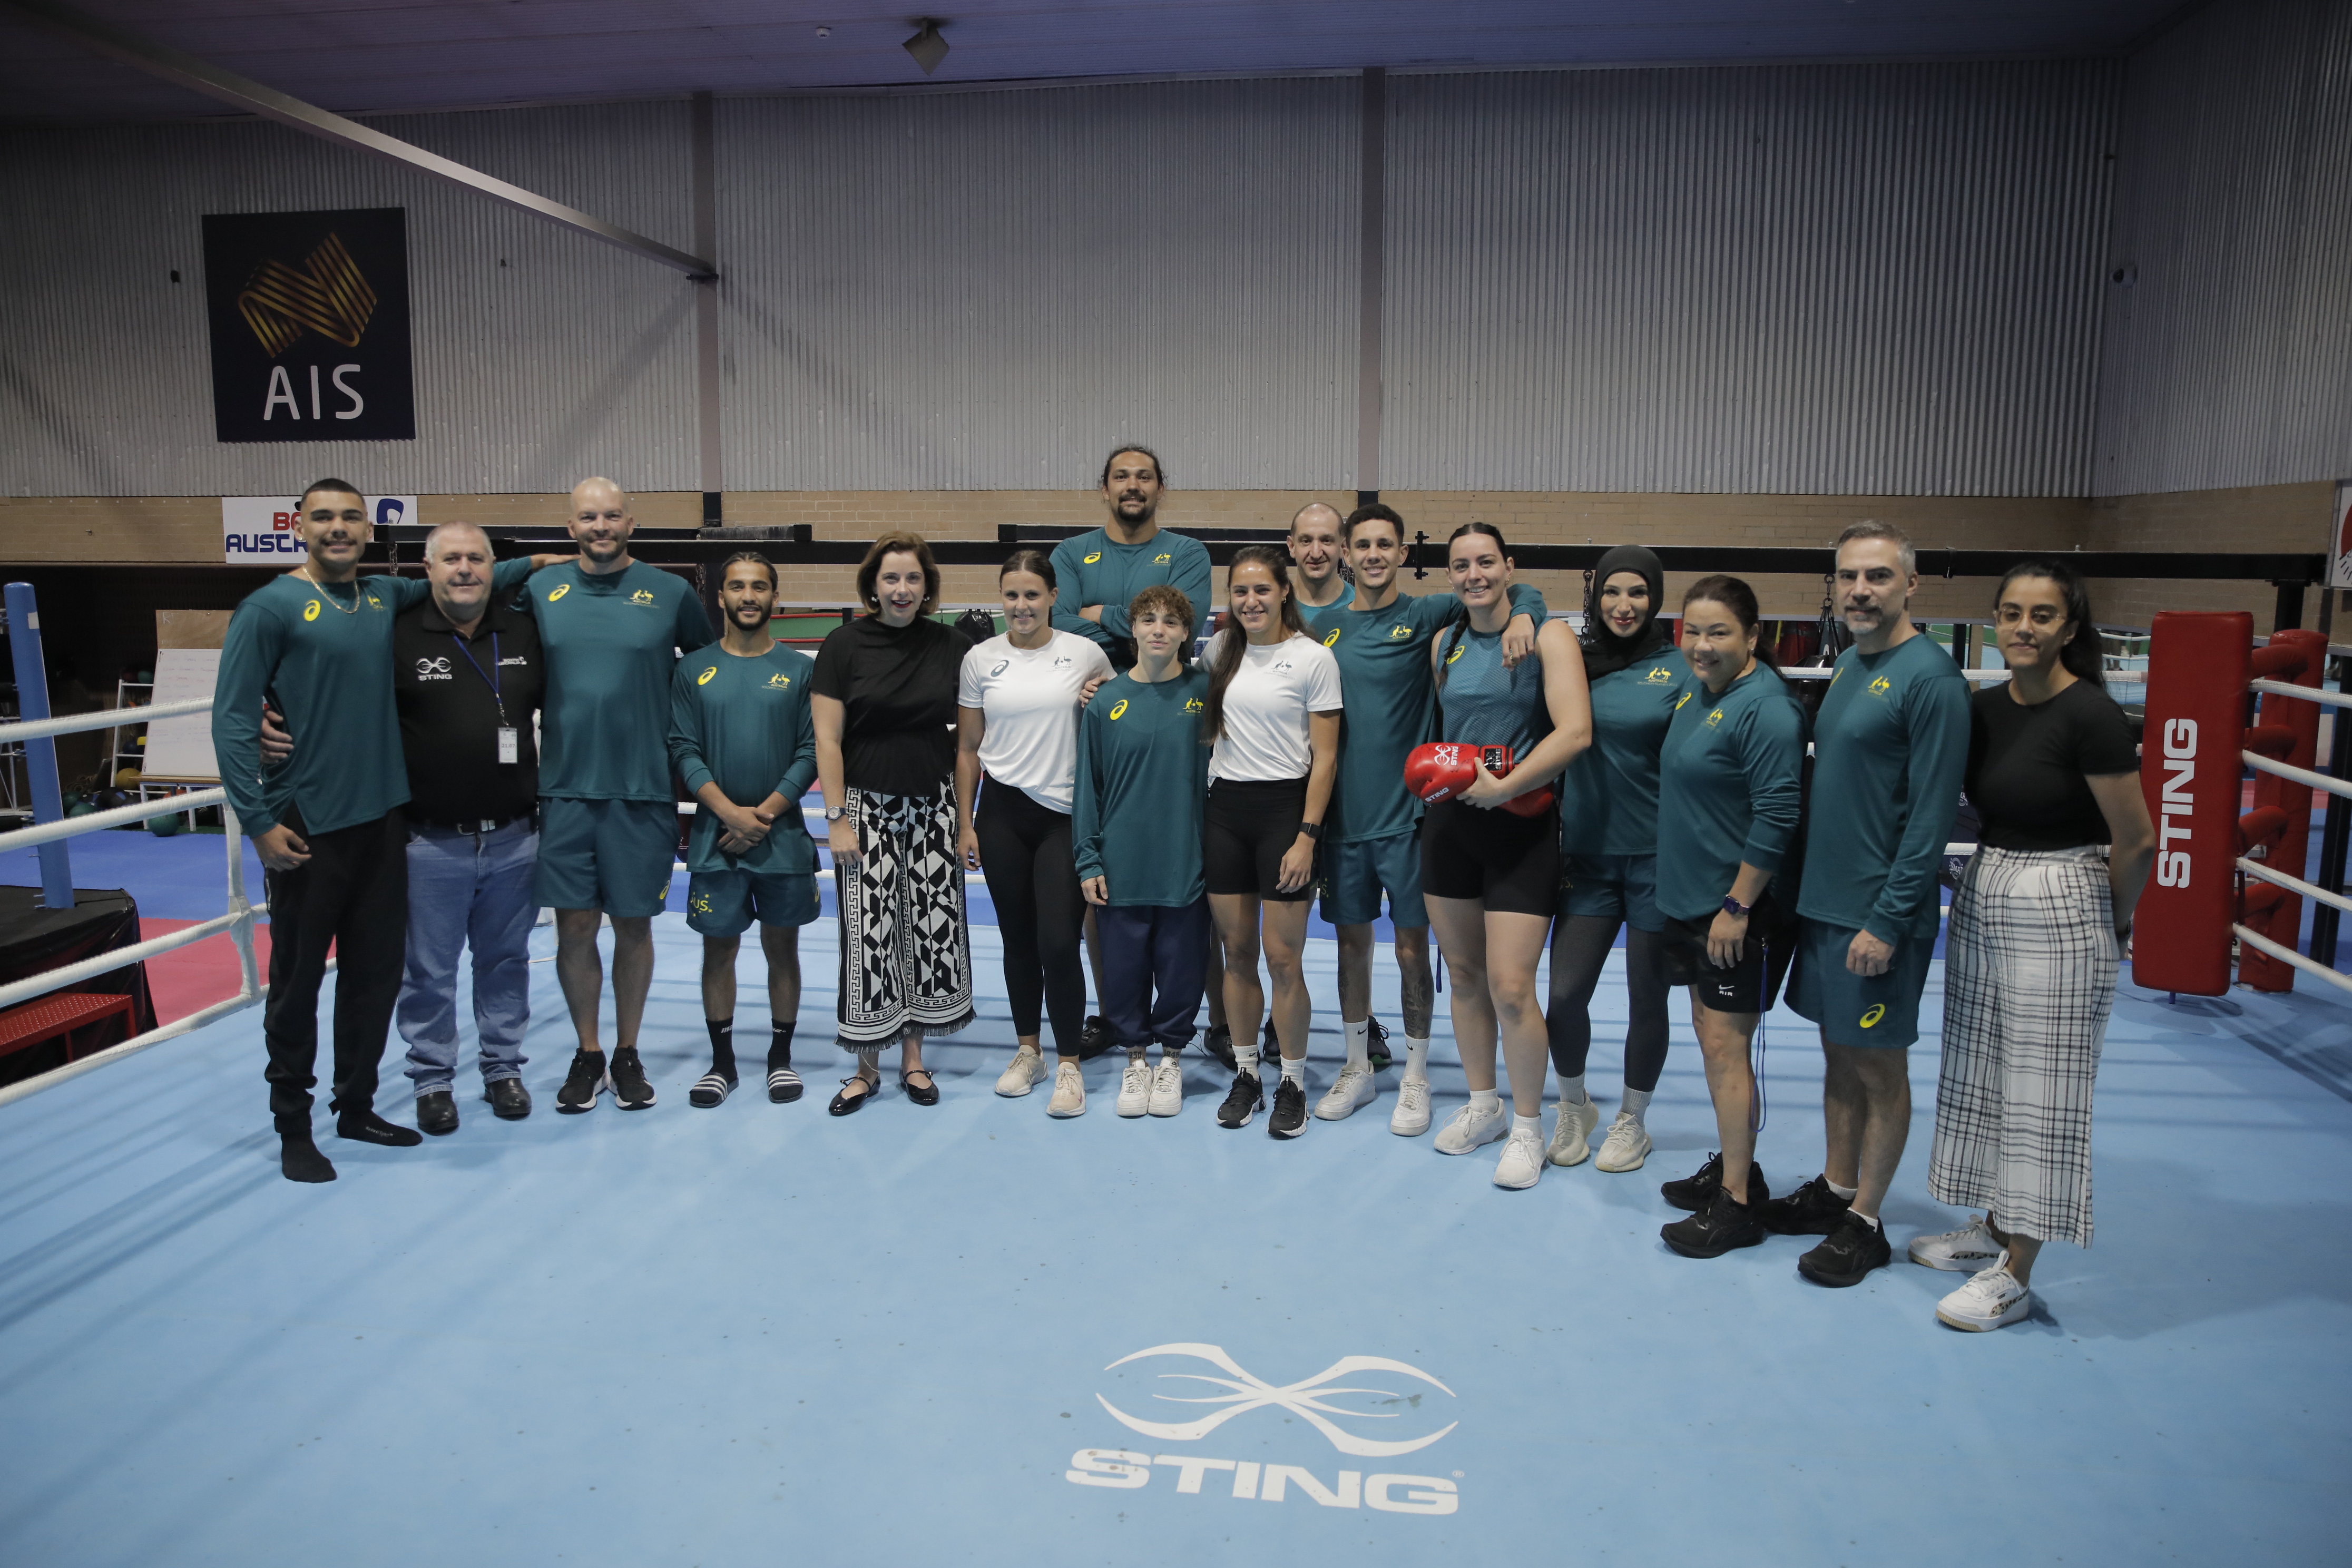 Minister and boxers stand in boxing ring at AIS.